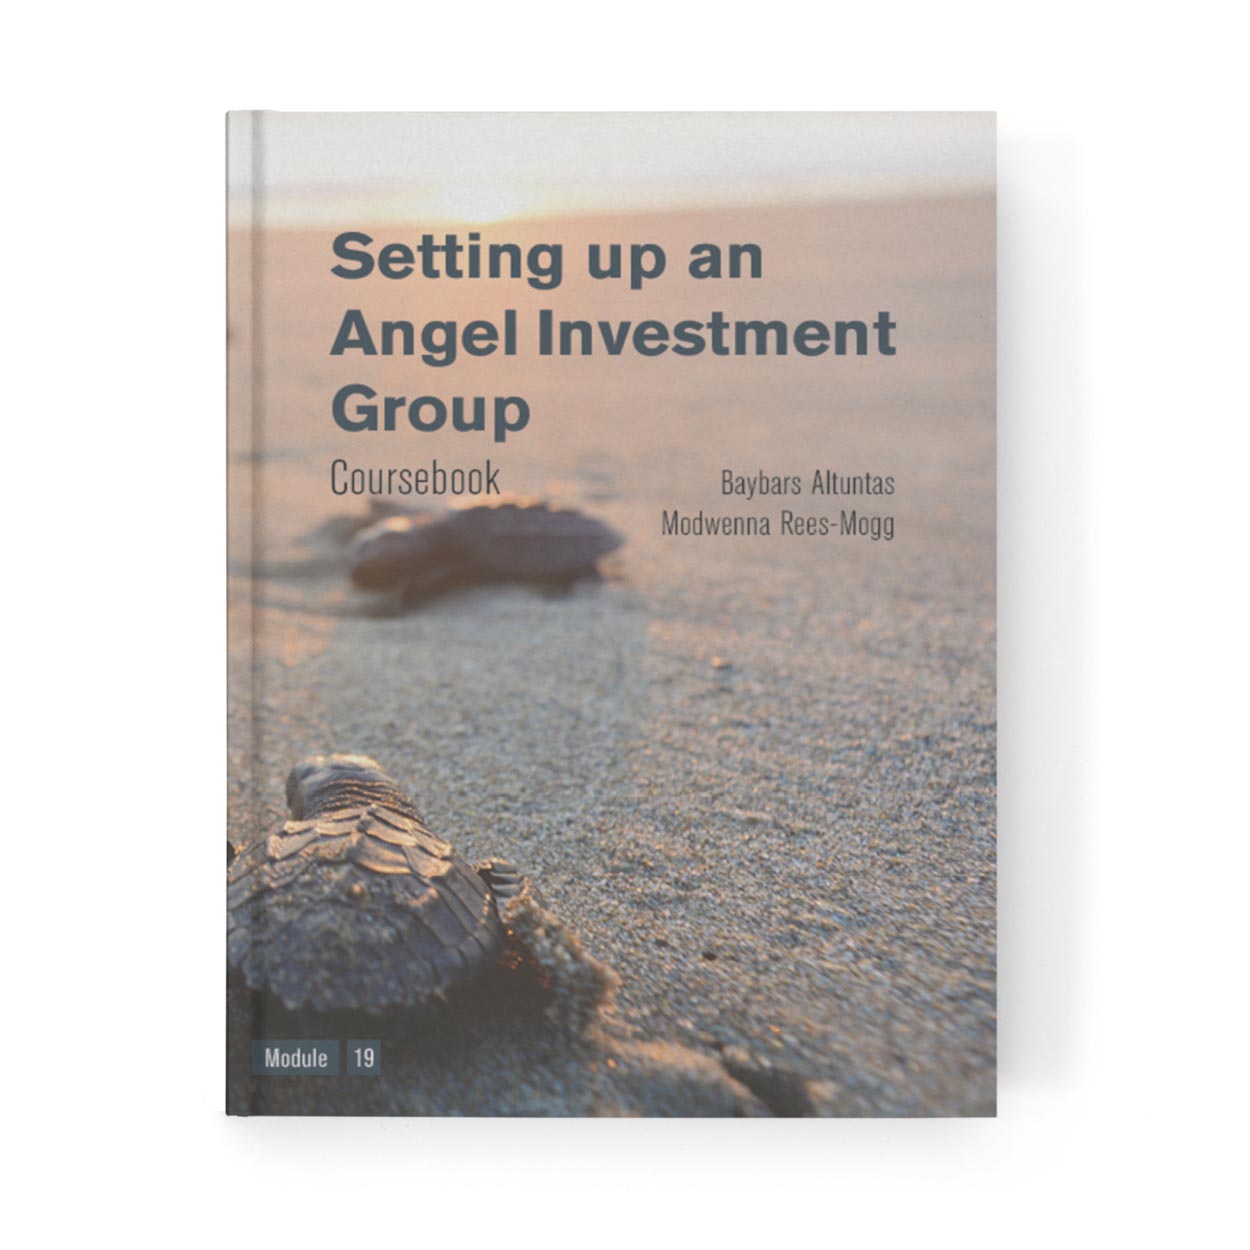 Setting up an Angel Investment Group Coursebook